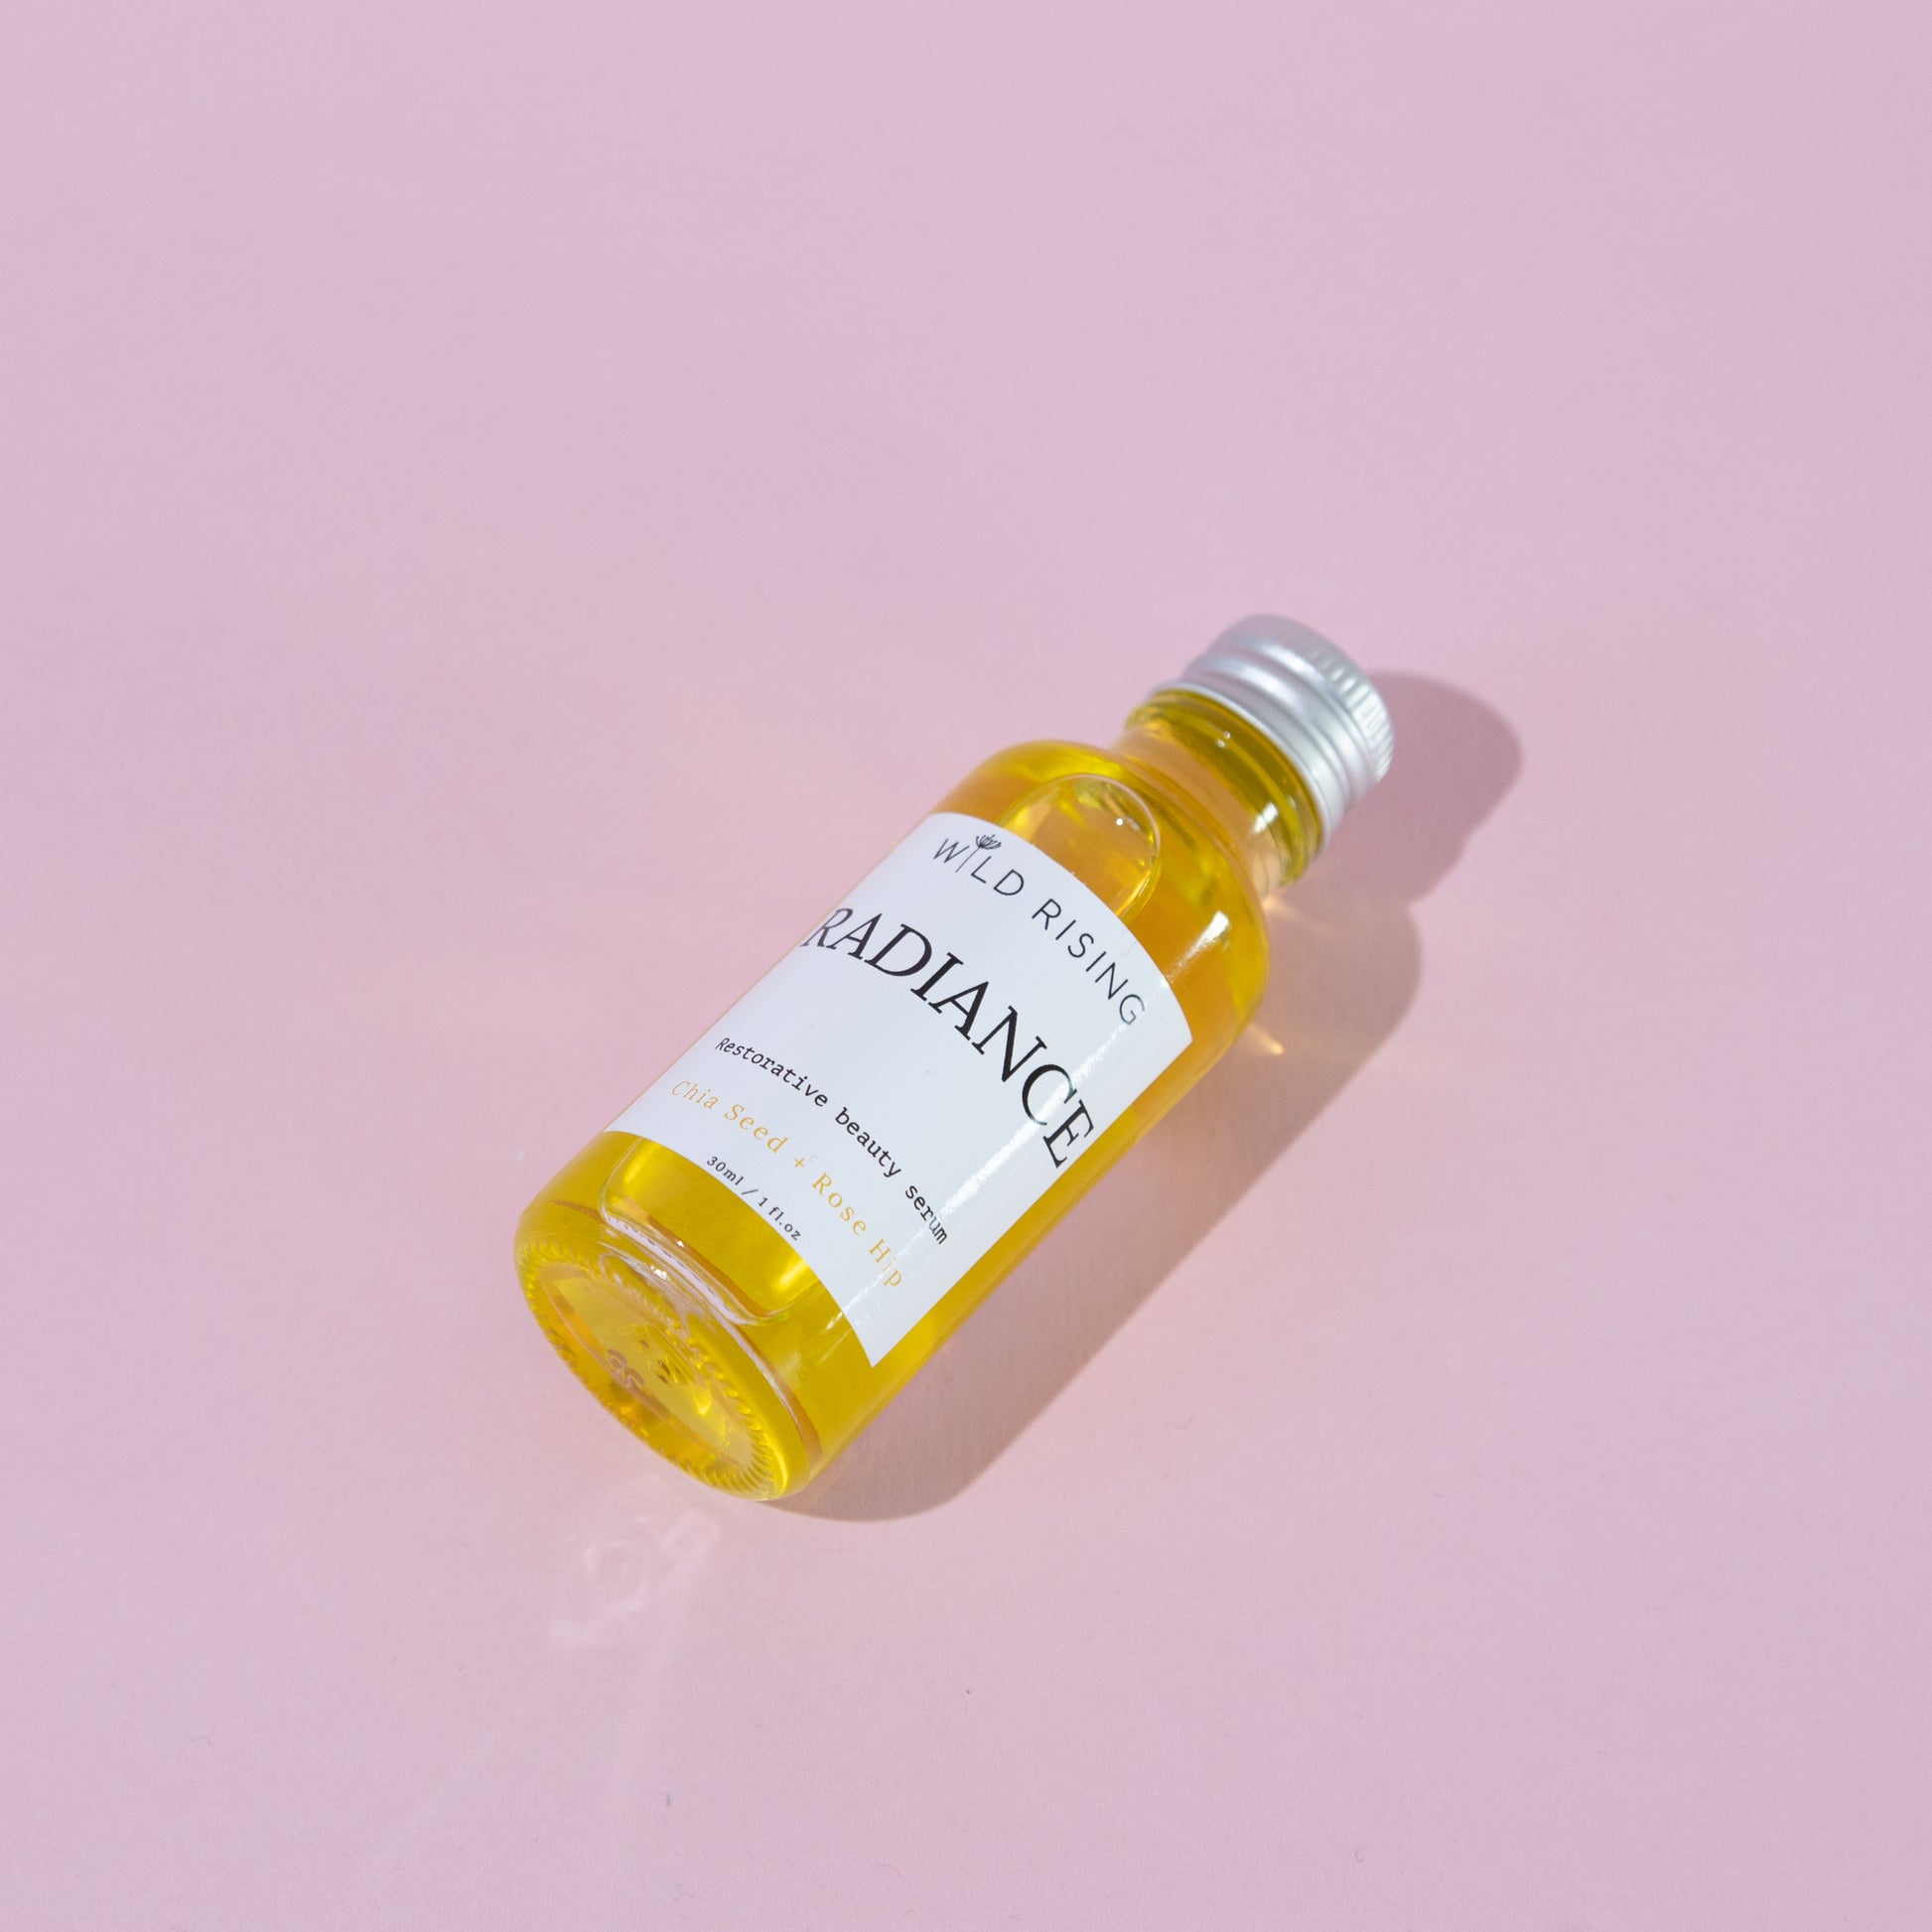 Flat lay shot of Radiance Face Oil